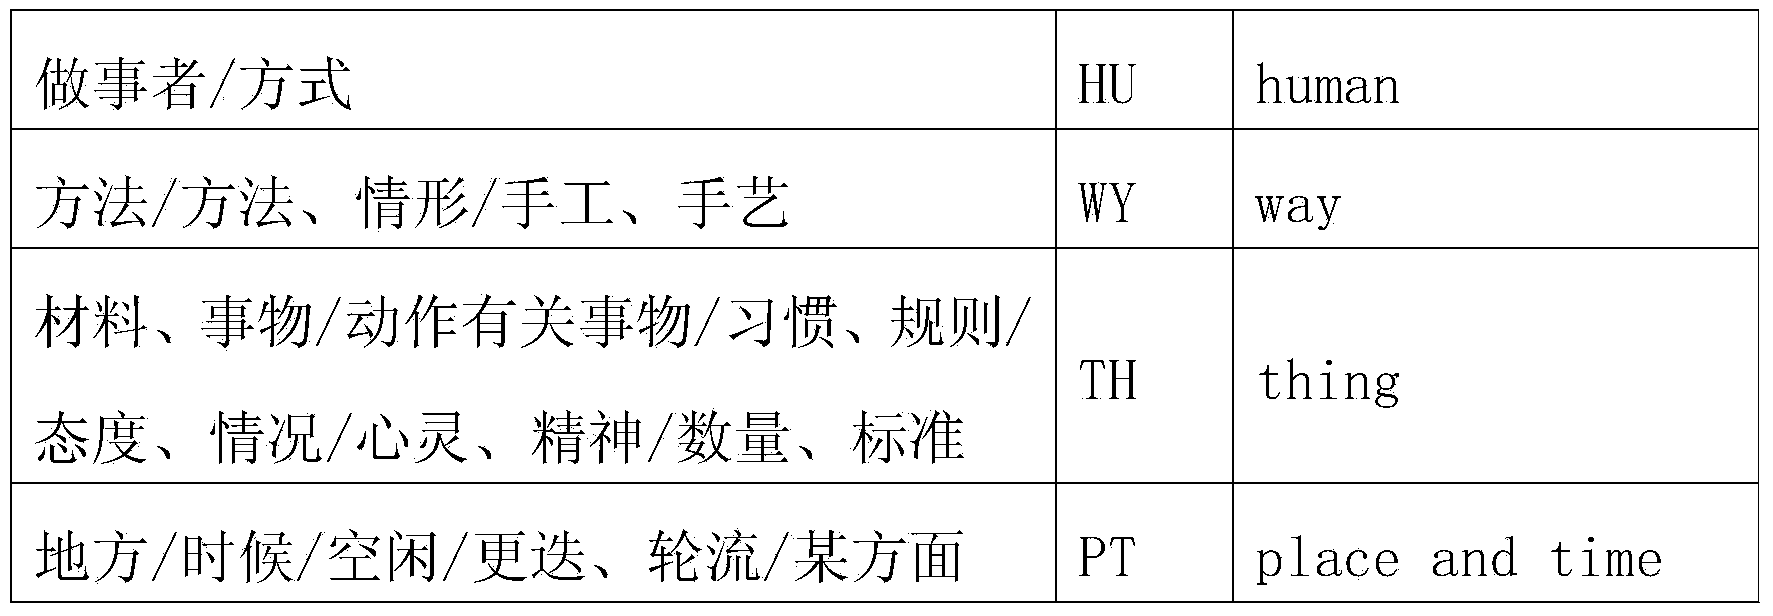 United labeling method for syntax of Tibet language and semantic roles